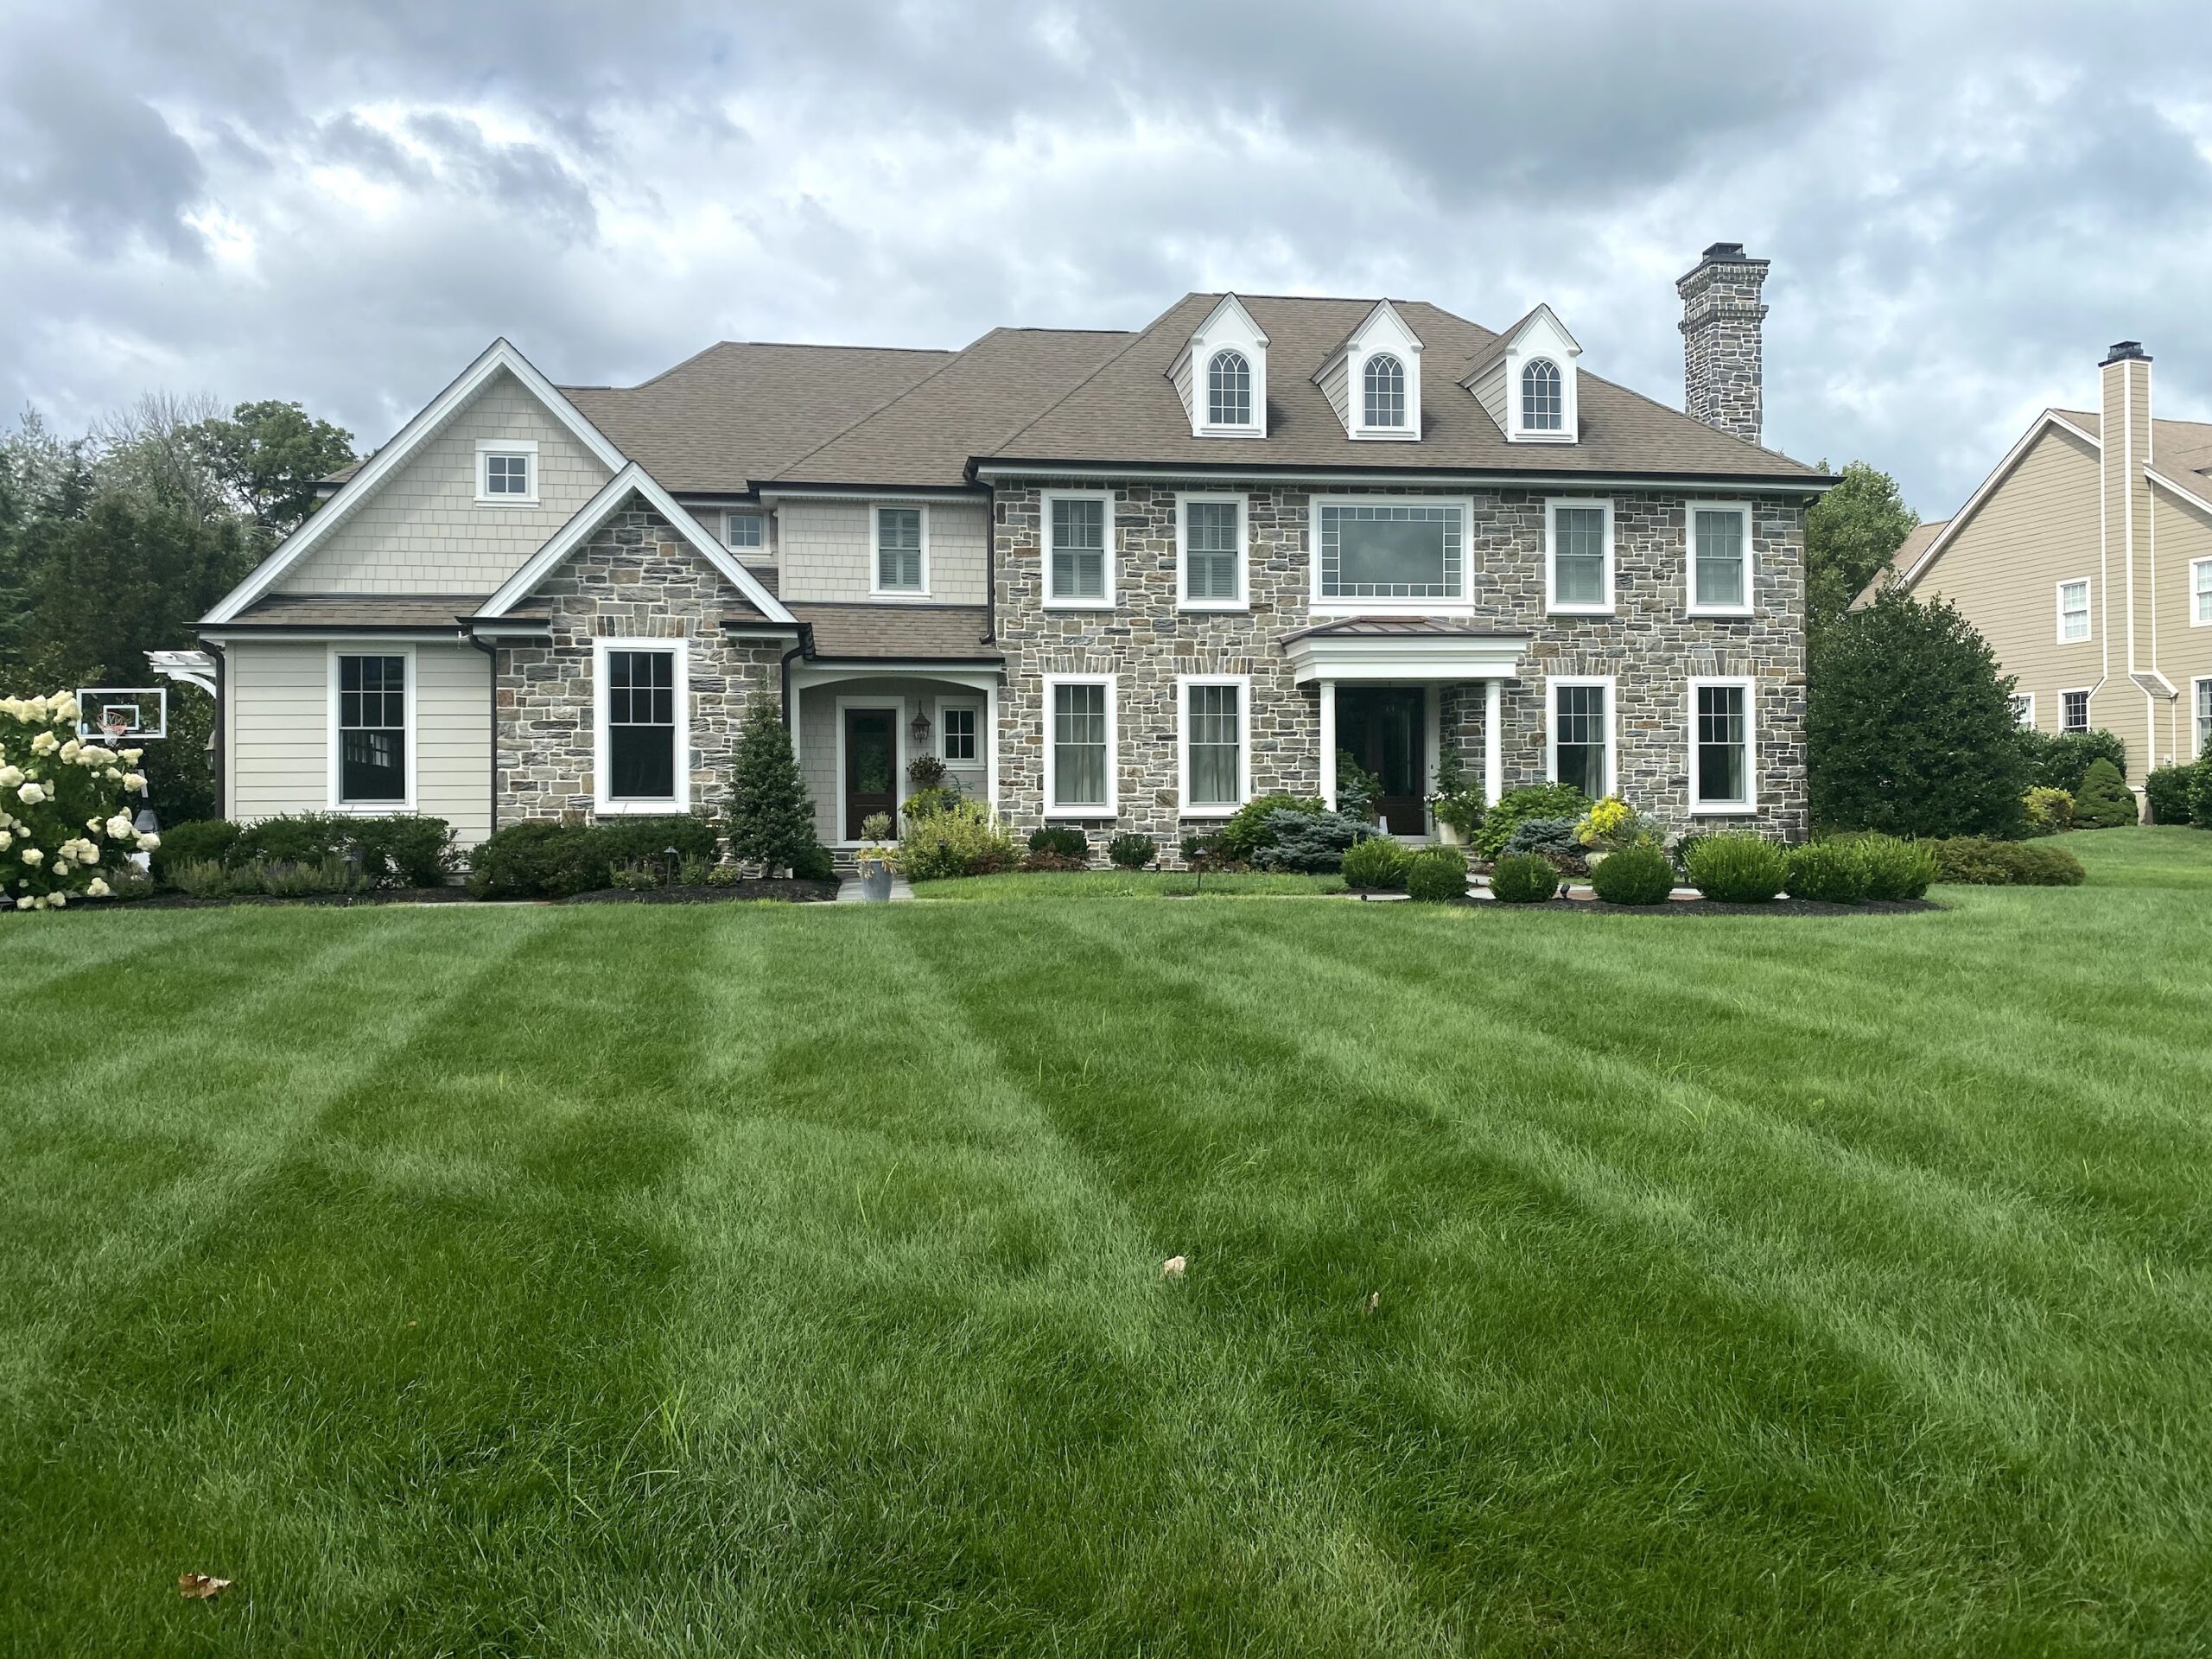 Large home with front yard